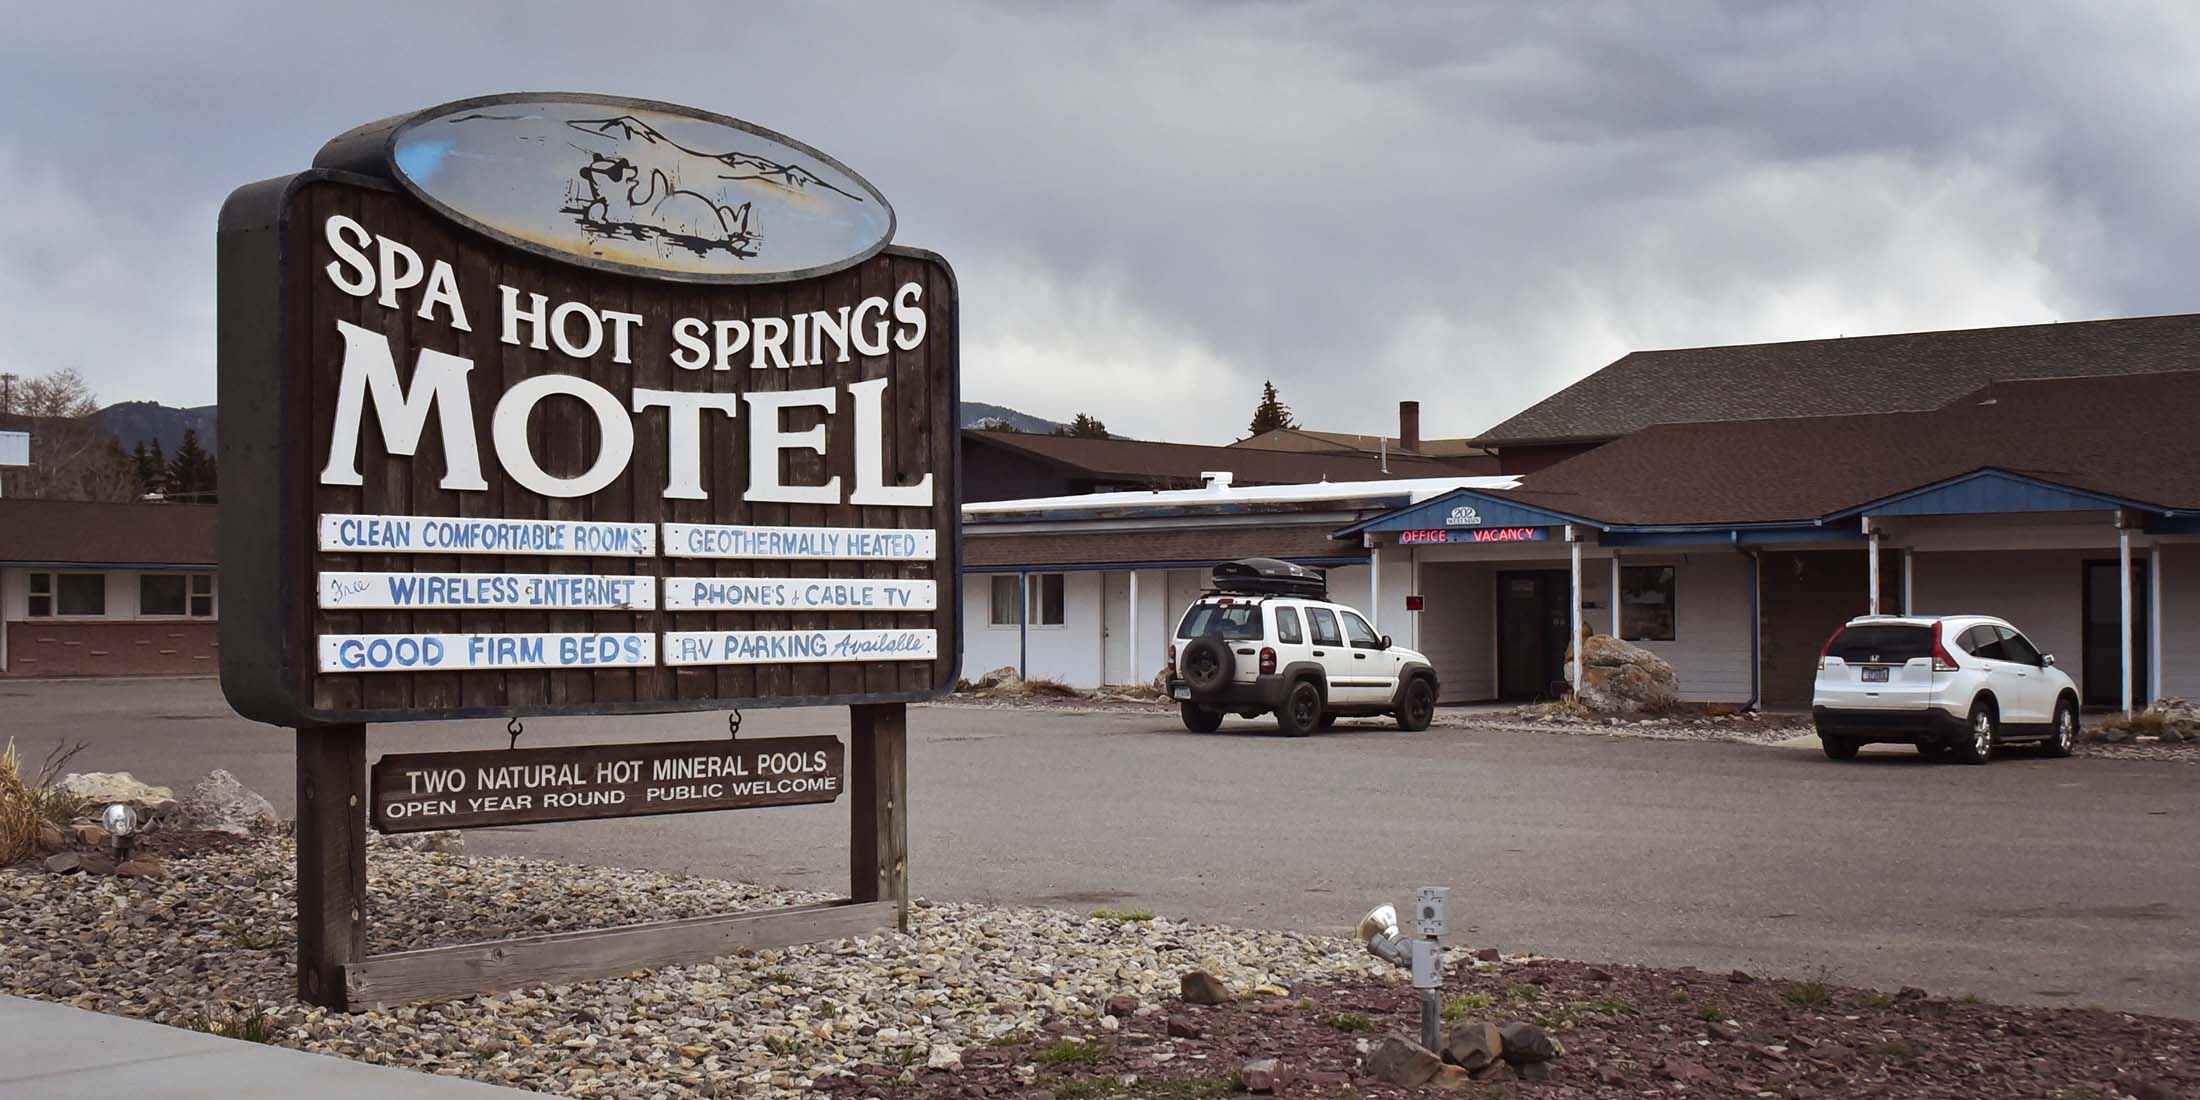 The Spa Hot Springs Motel is located on Highway 89 in White Sulphur Springs, Montana - Meagher County. 